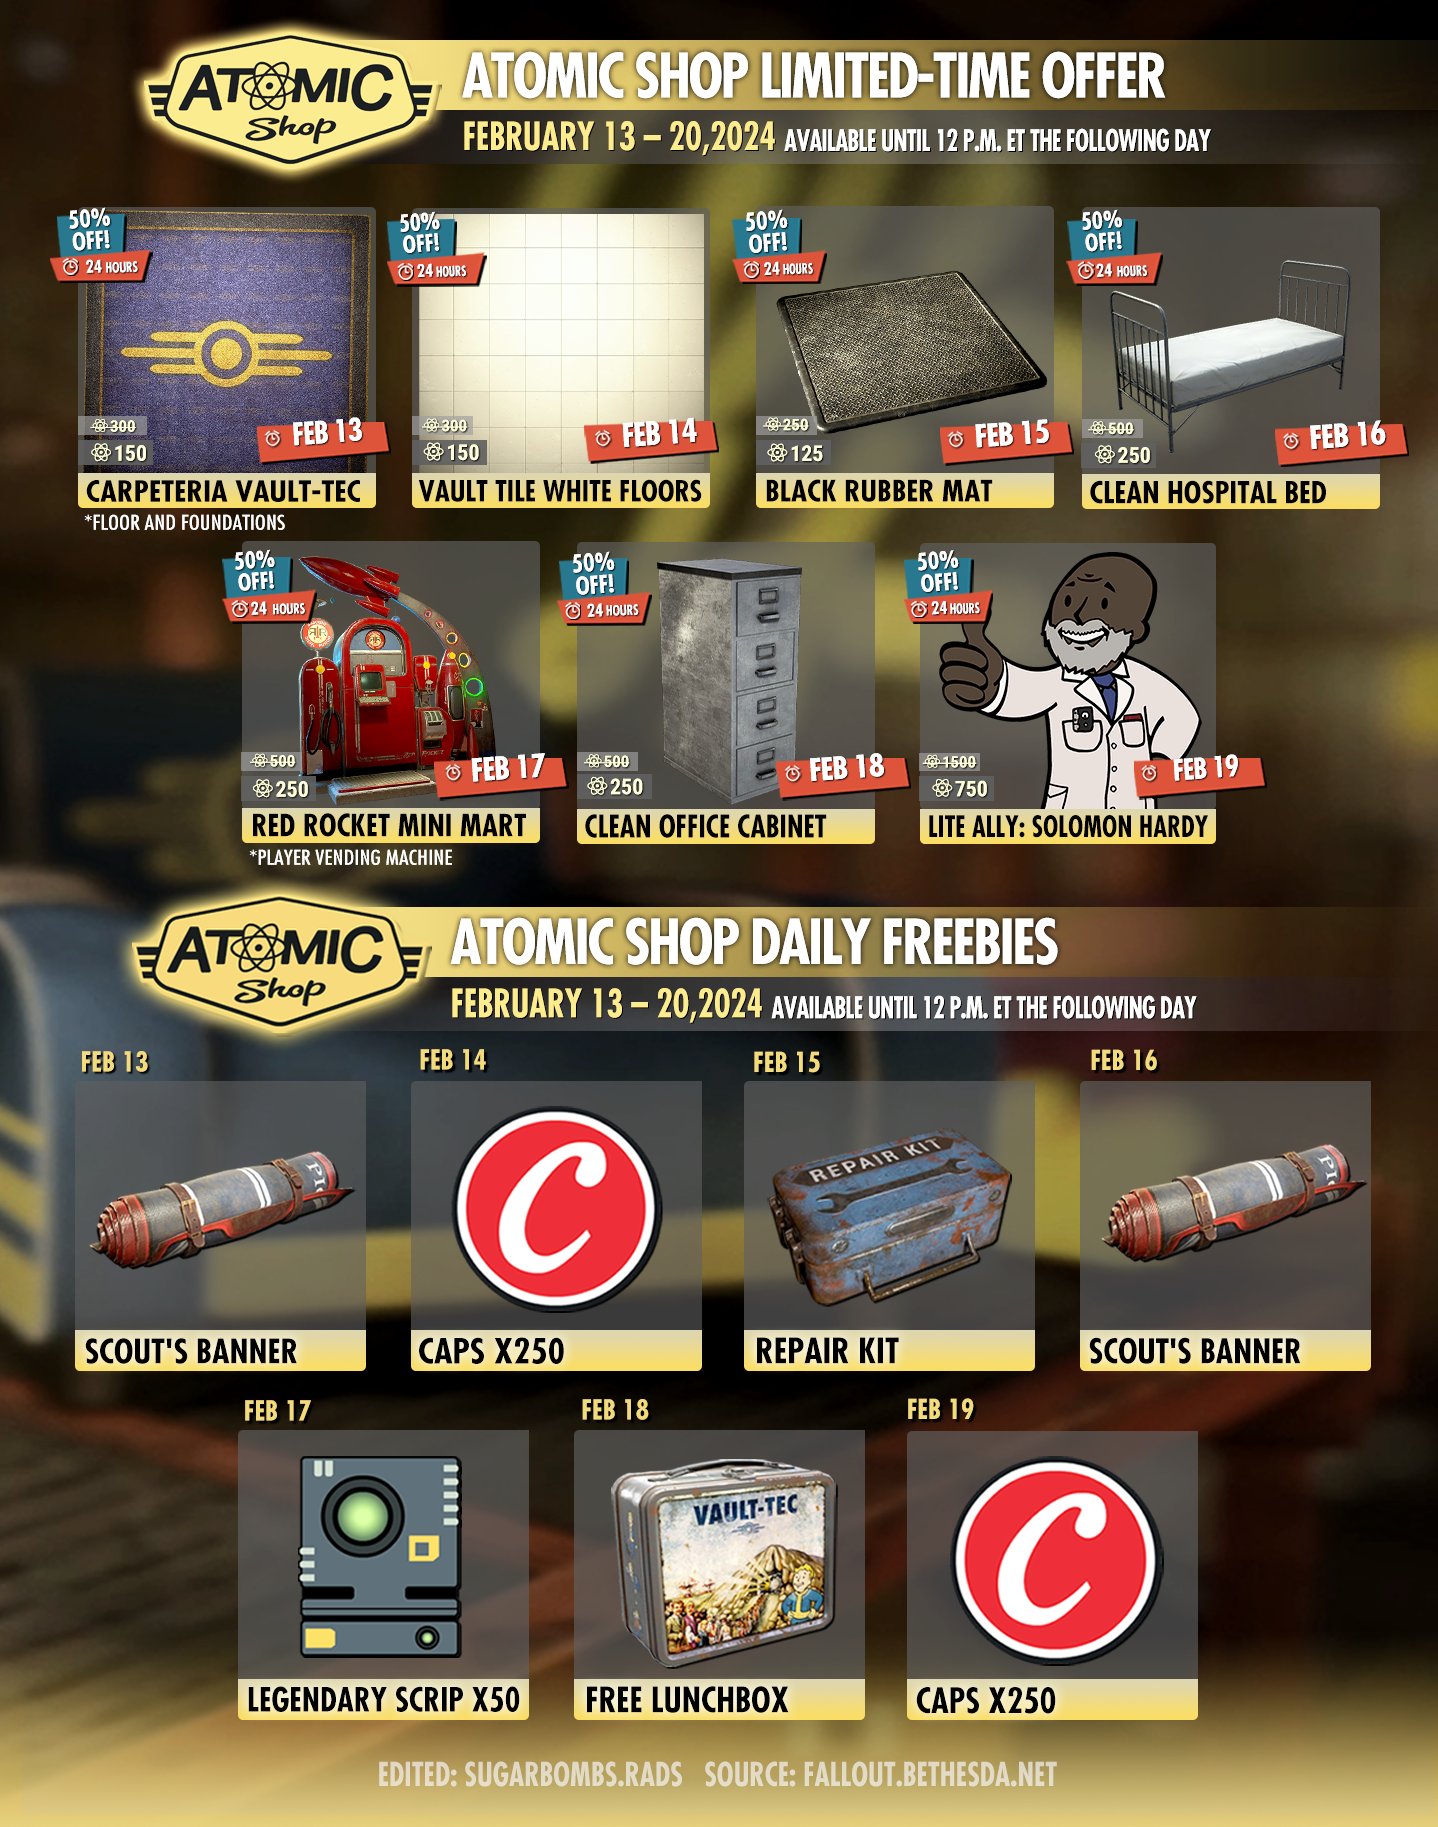 Fallout 76: New Atomic Shop Items (& Special Fallout Anthology